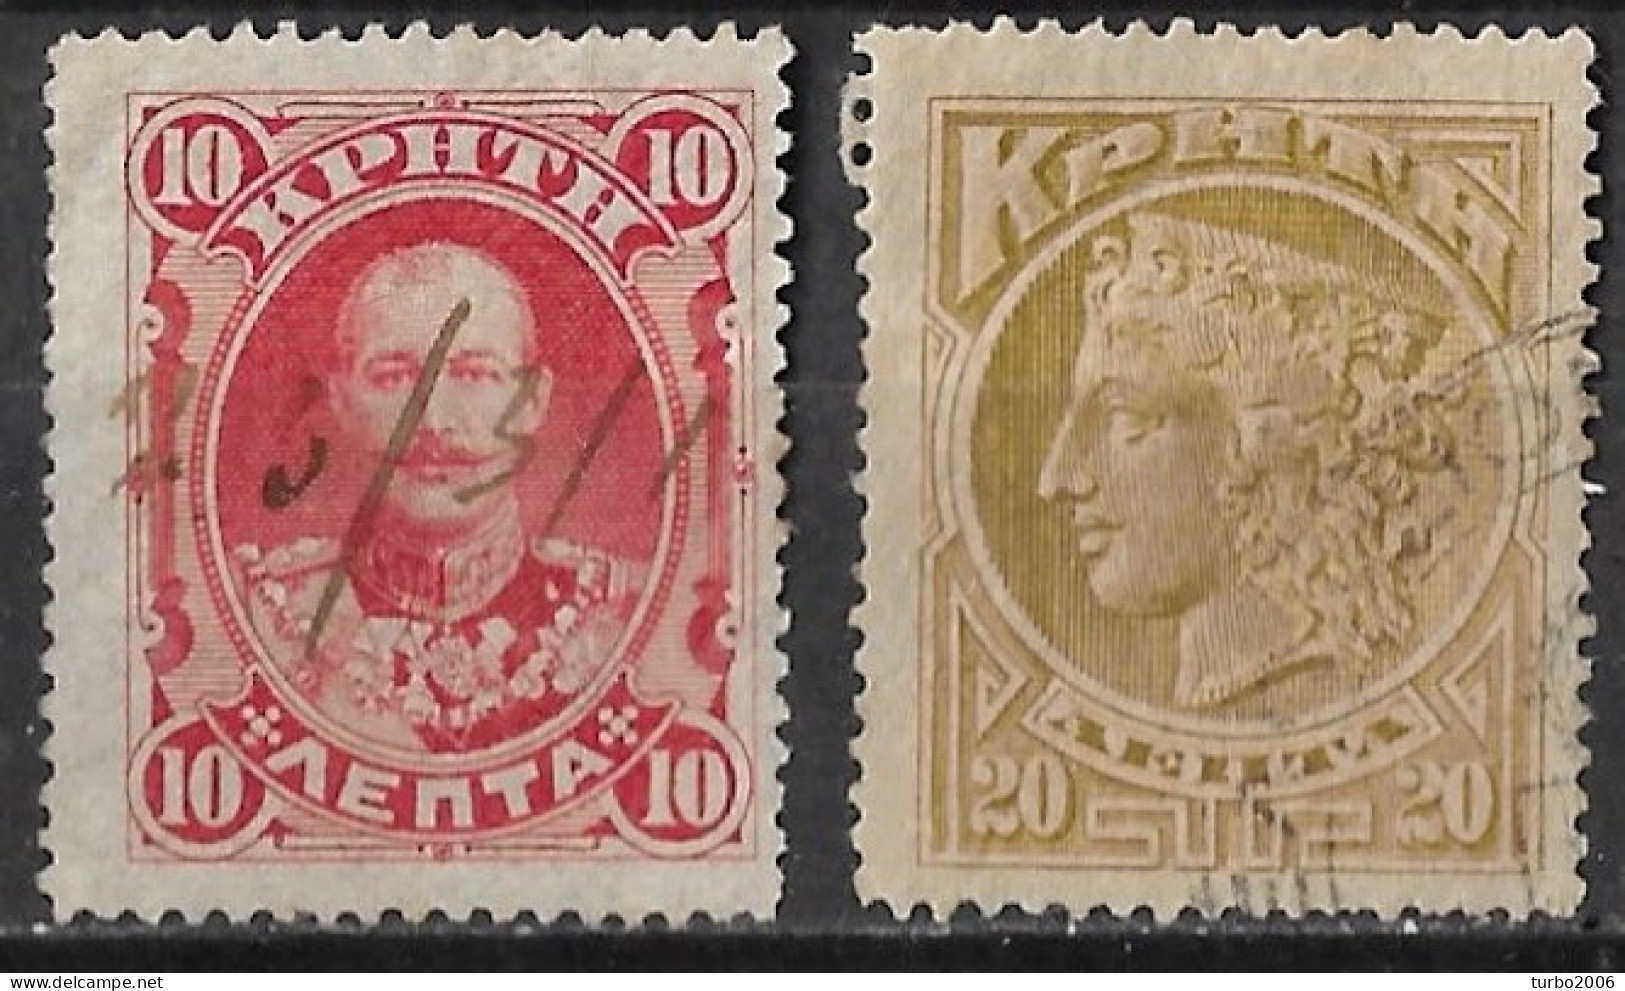 CRETE Fiscally Used 1900 1st Issue Of The Cretan State 10 L. Red Vl. 3 + Fiscal 20 L Yellow Olive (Feenstra 36) - Kreta